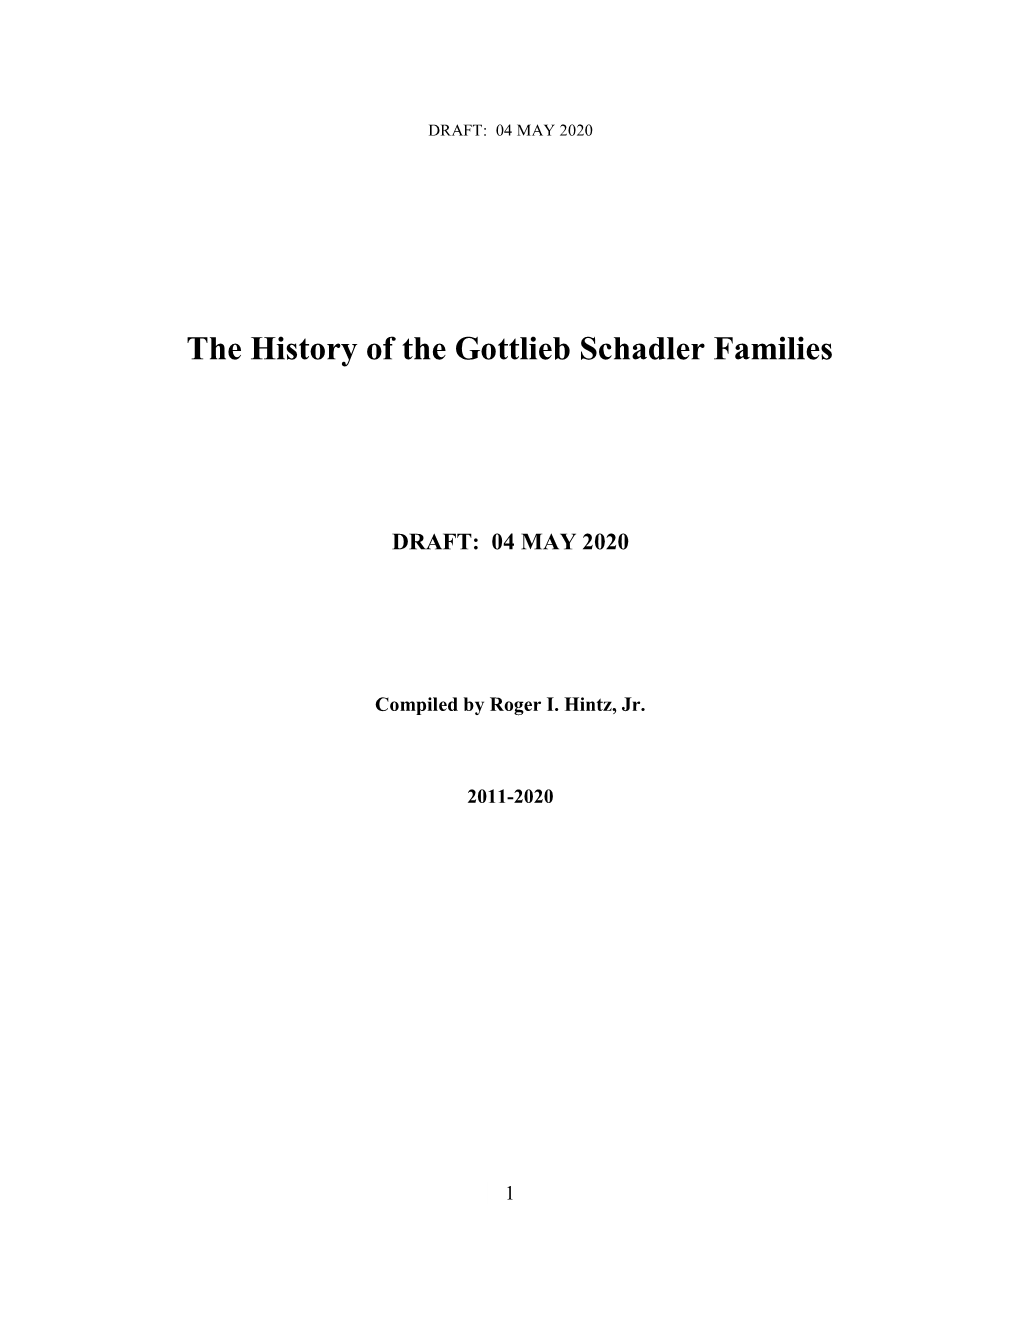 The History of the Gottlieb Schadler Families